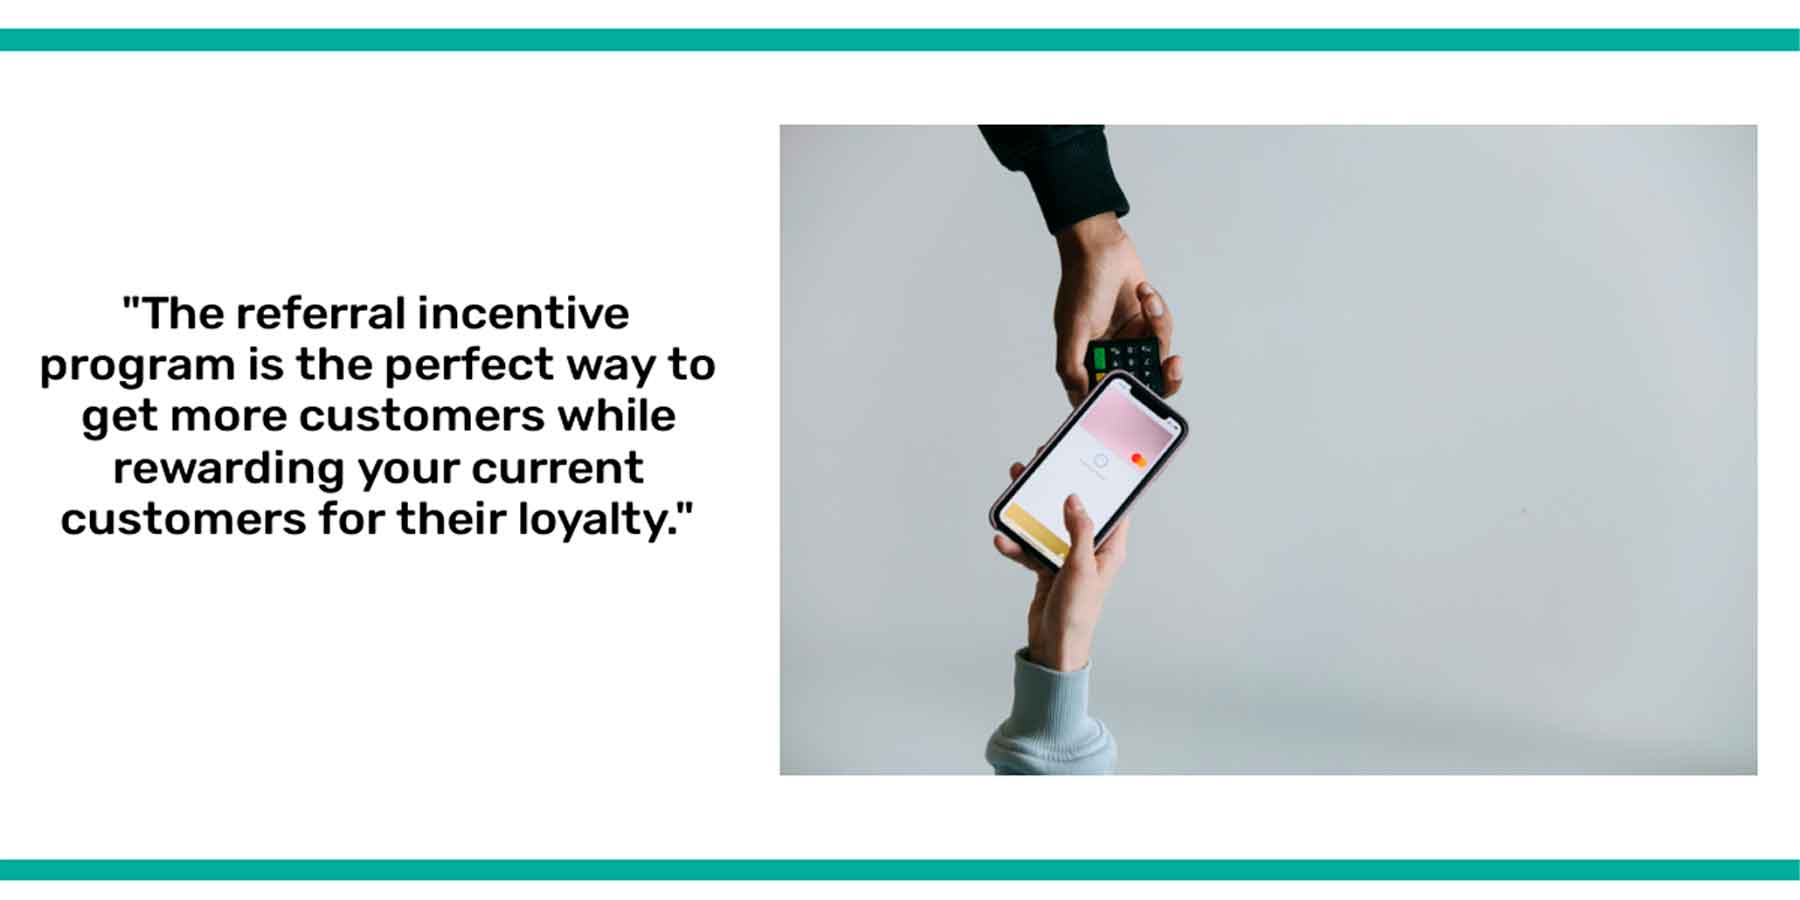 The referral incentive program is the perfect way to get more customers while rewarding your current customers for their loyalty